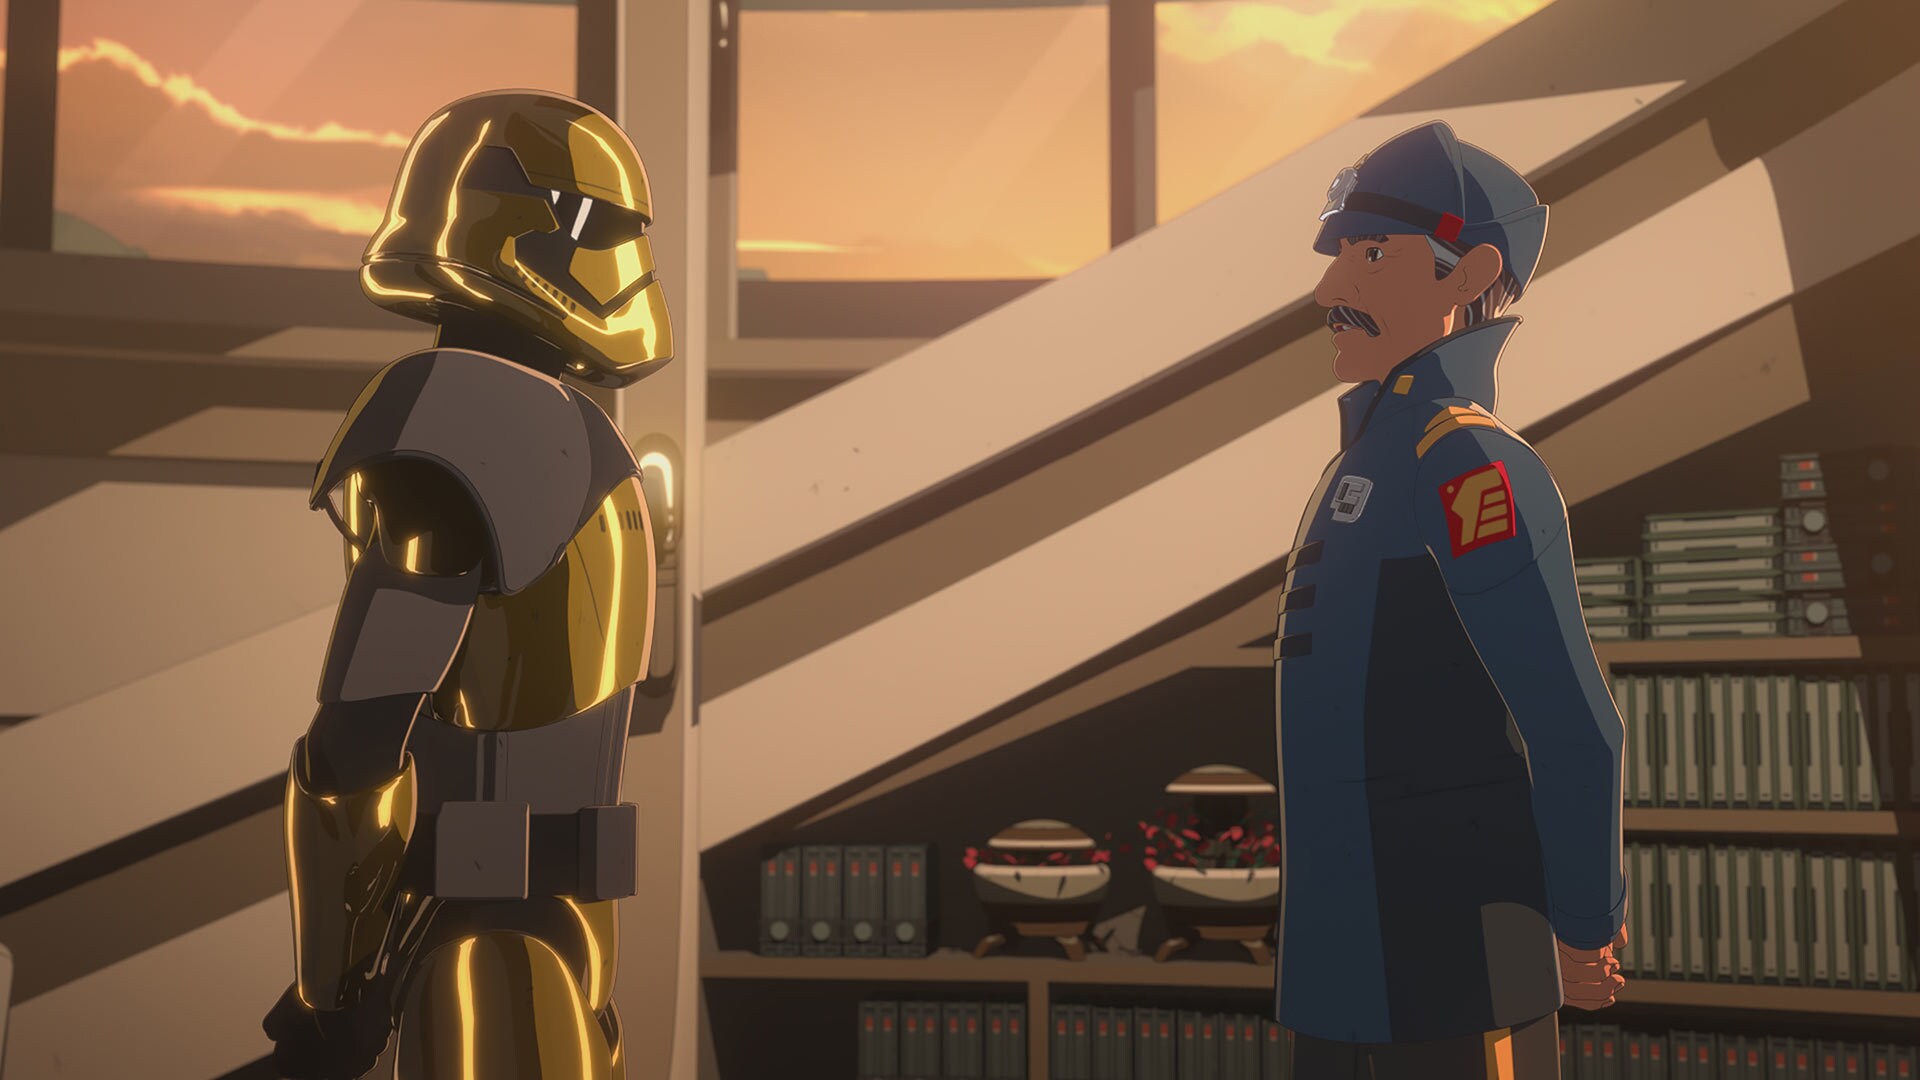 In his office, Captain Doza has a tense meeting with Commander Pyre. He asks that the First Order...